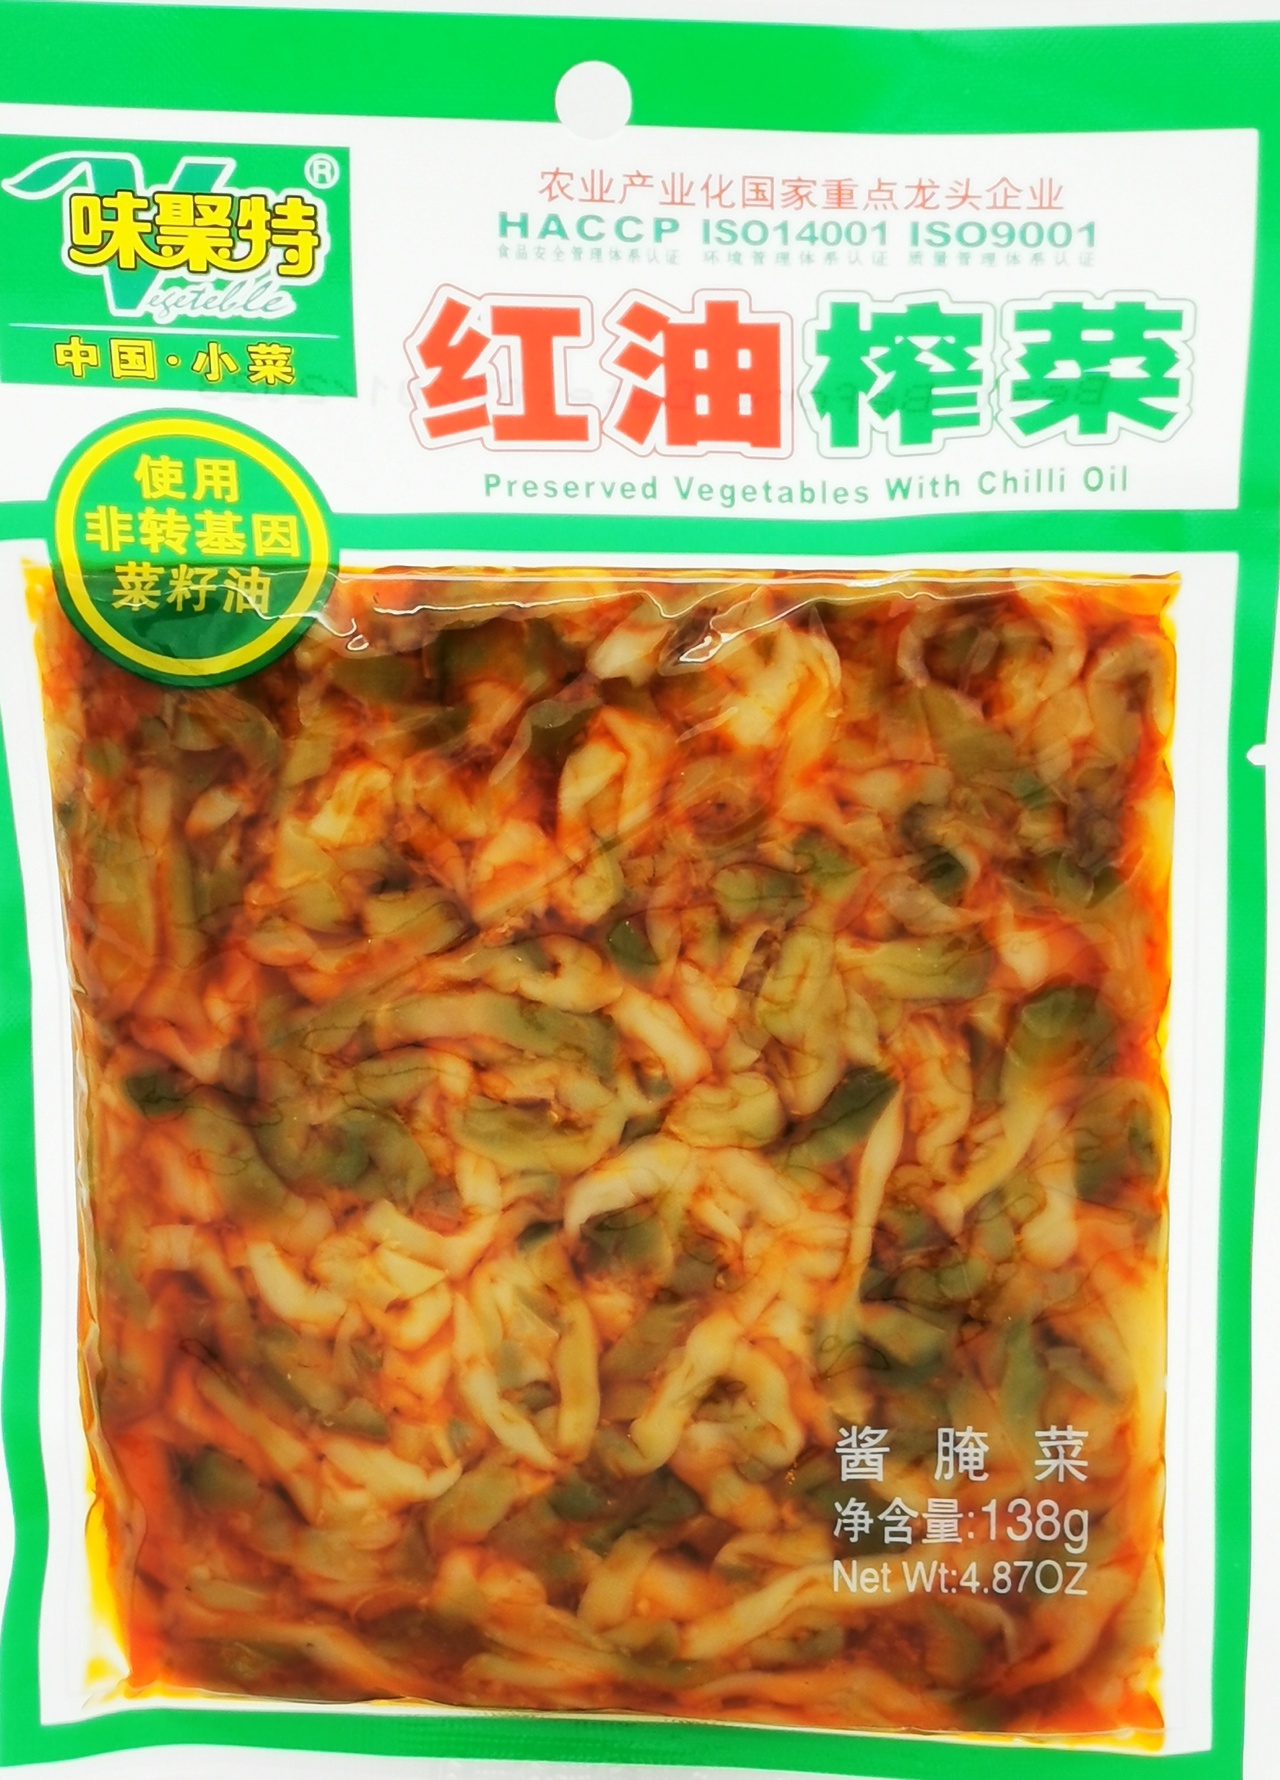 WEIJUTE PICKLED VEGETABLES WITH CHILI OIL 138g